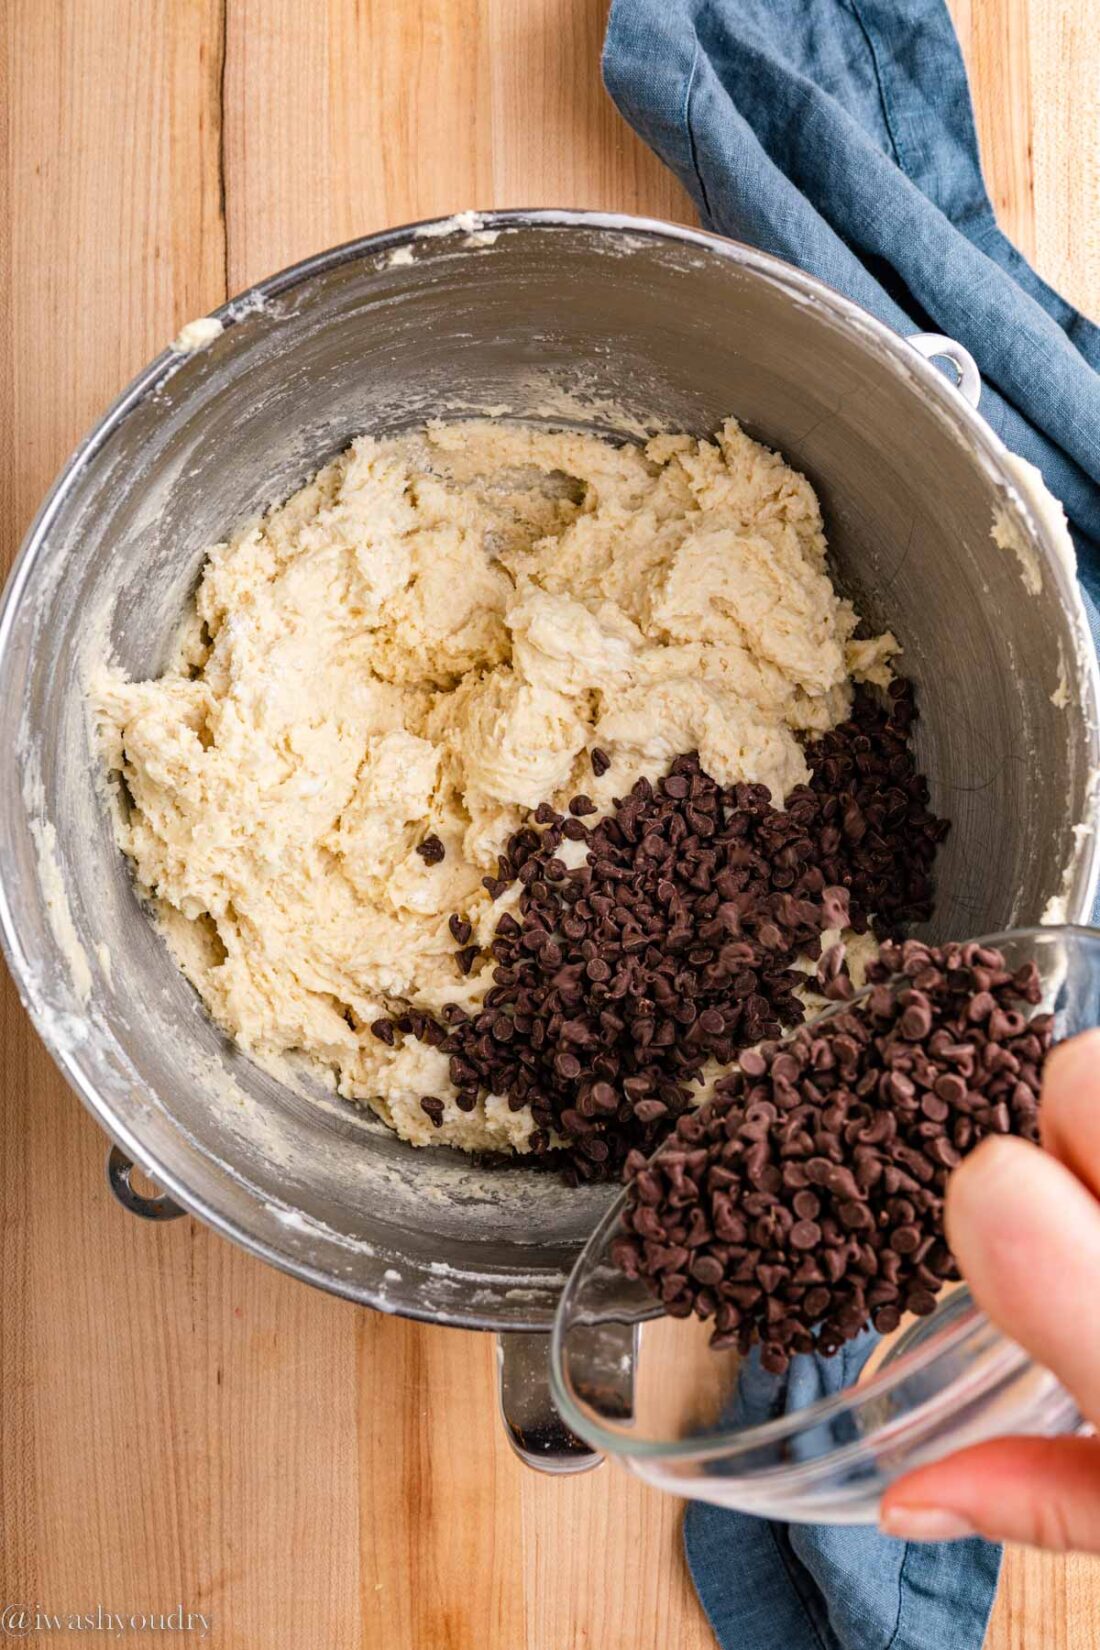 Hand pouring chocolate chips into muffin batter in metal mixing bowl,. 